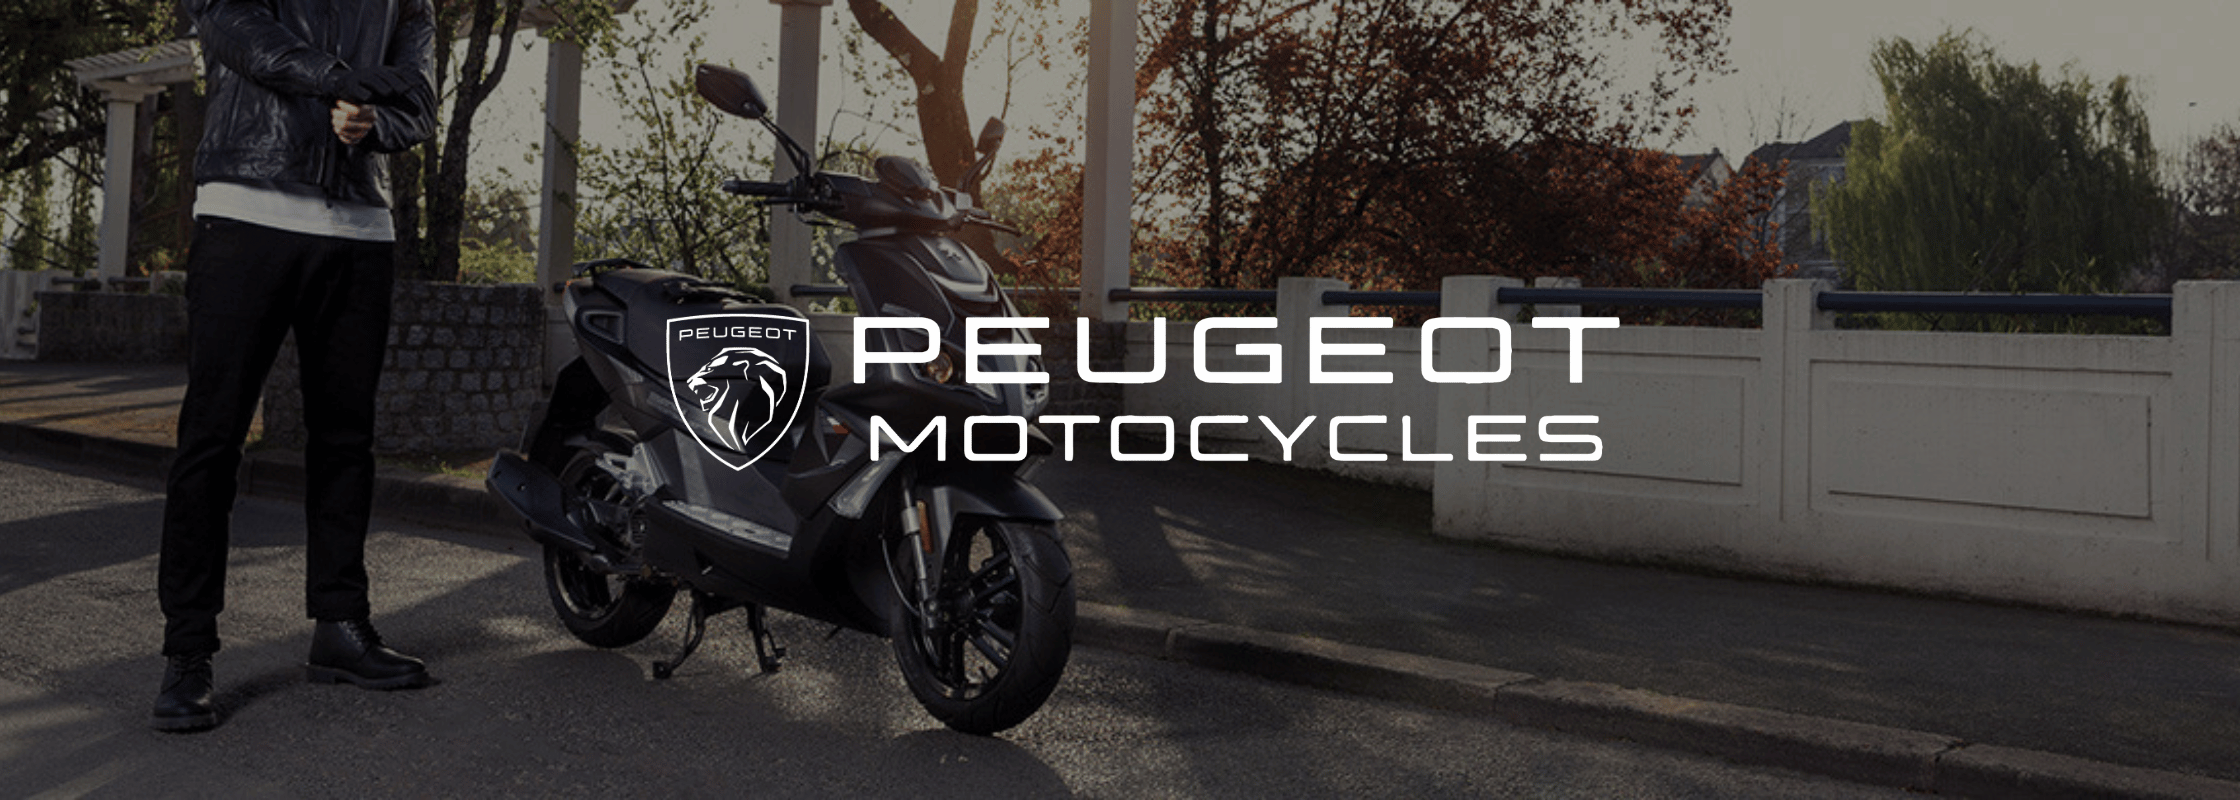 Peugeot Motorcycles 50cc & Electric